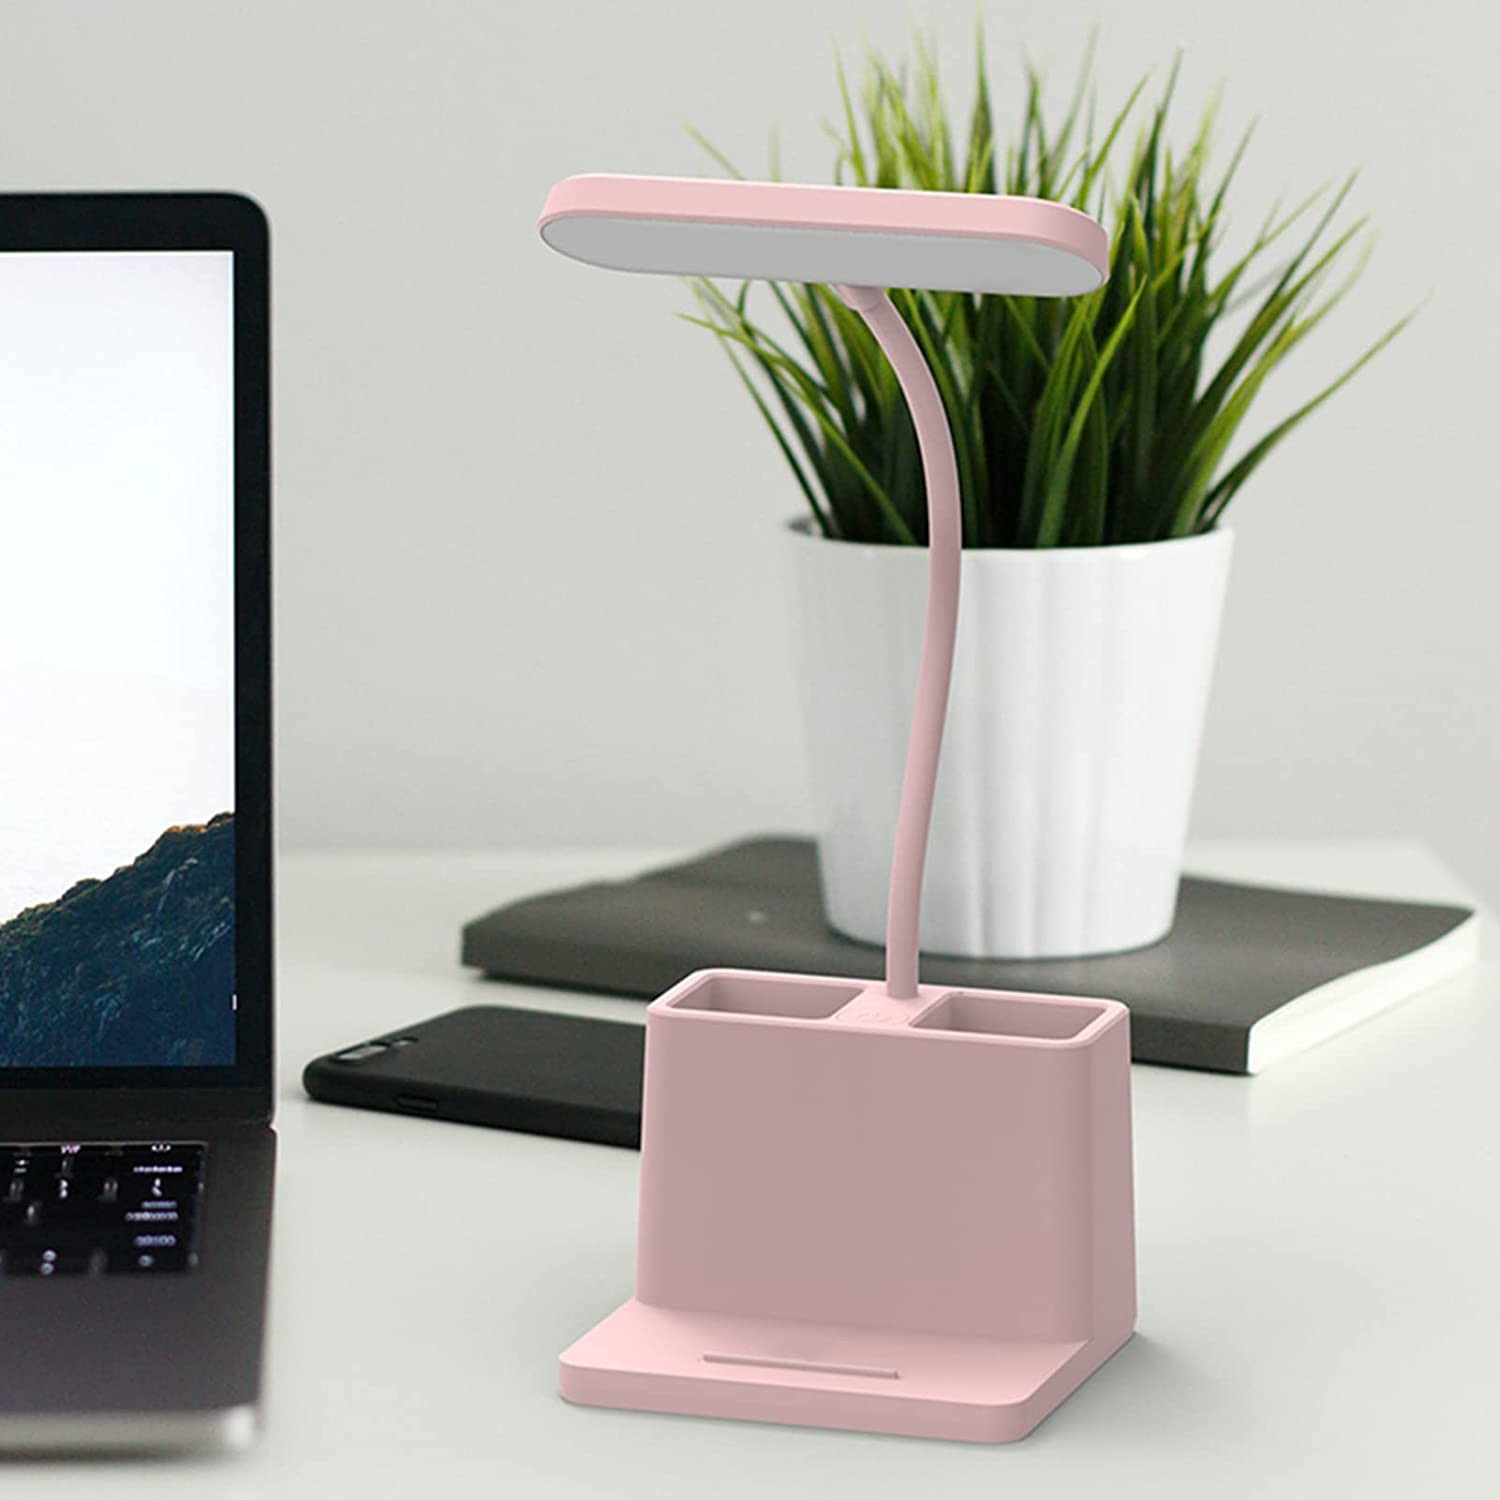 HH829 Wholesale Multifunction Study Lamp with Pen Holder and Mobile Phone Holder Reading Desk LED Table Lamp Flexible Eye Caring